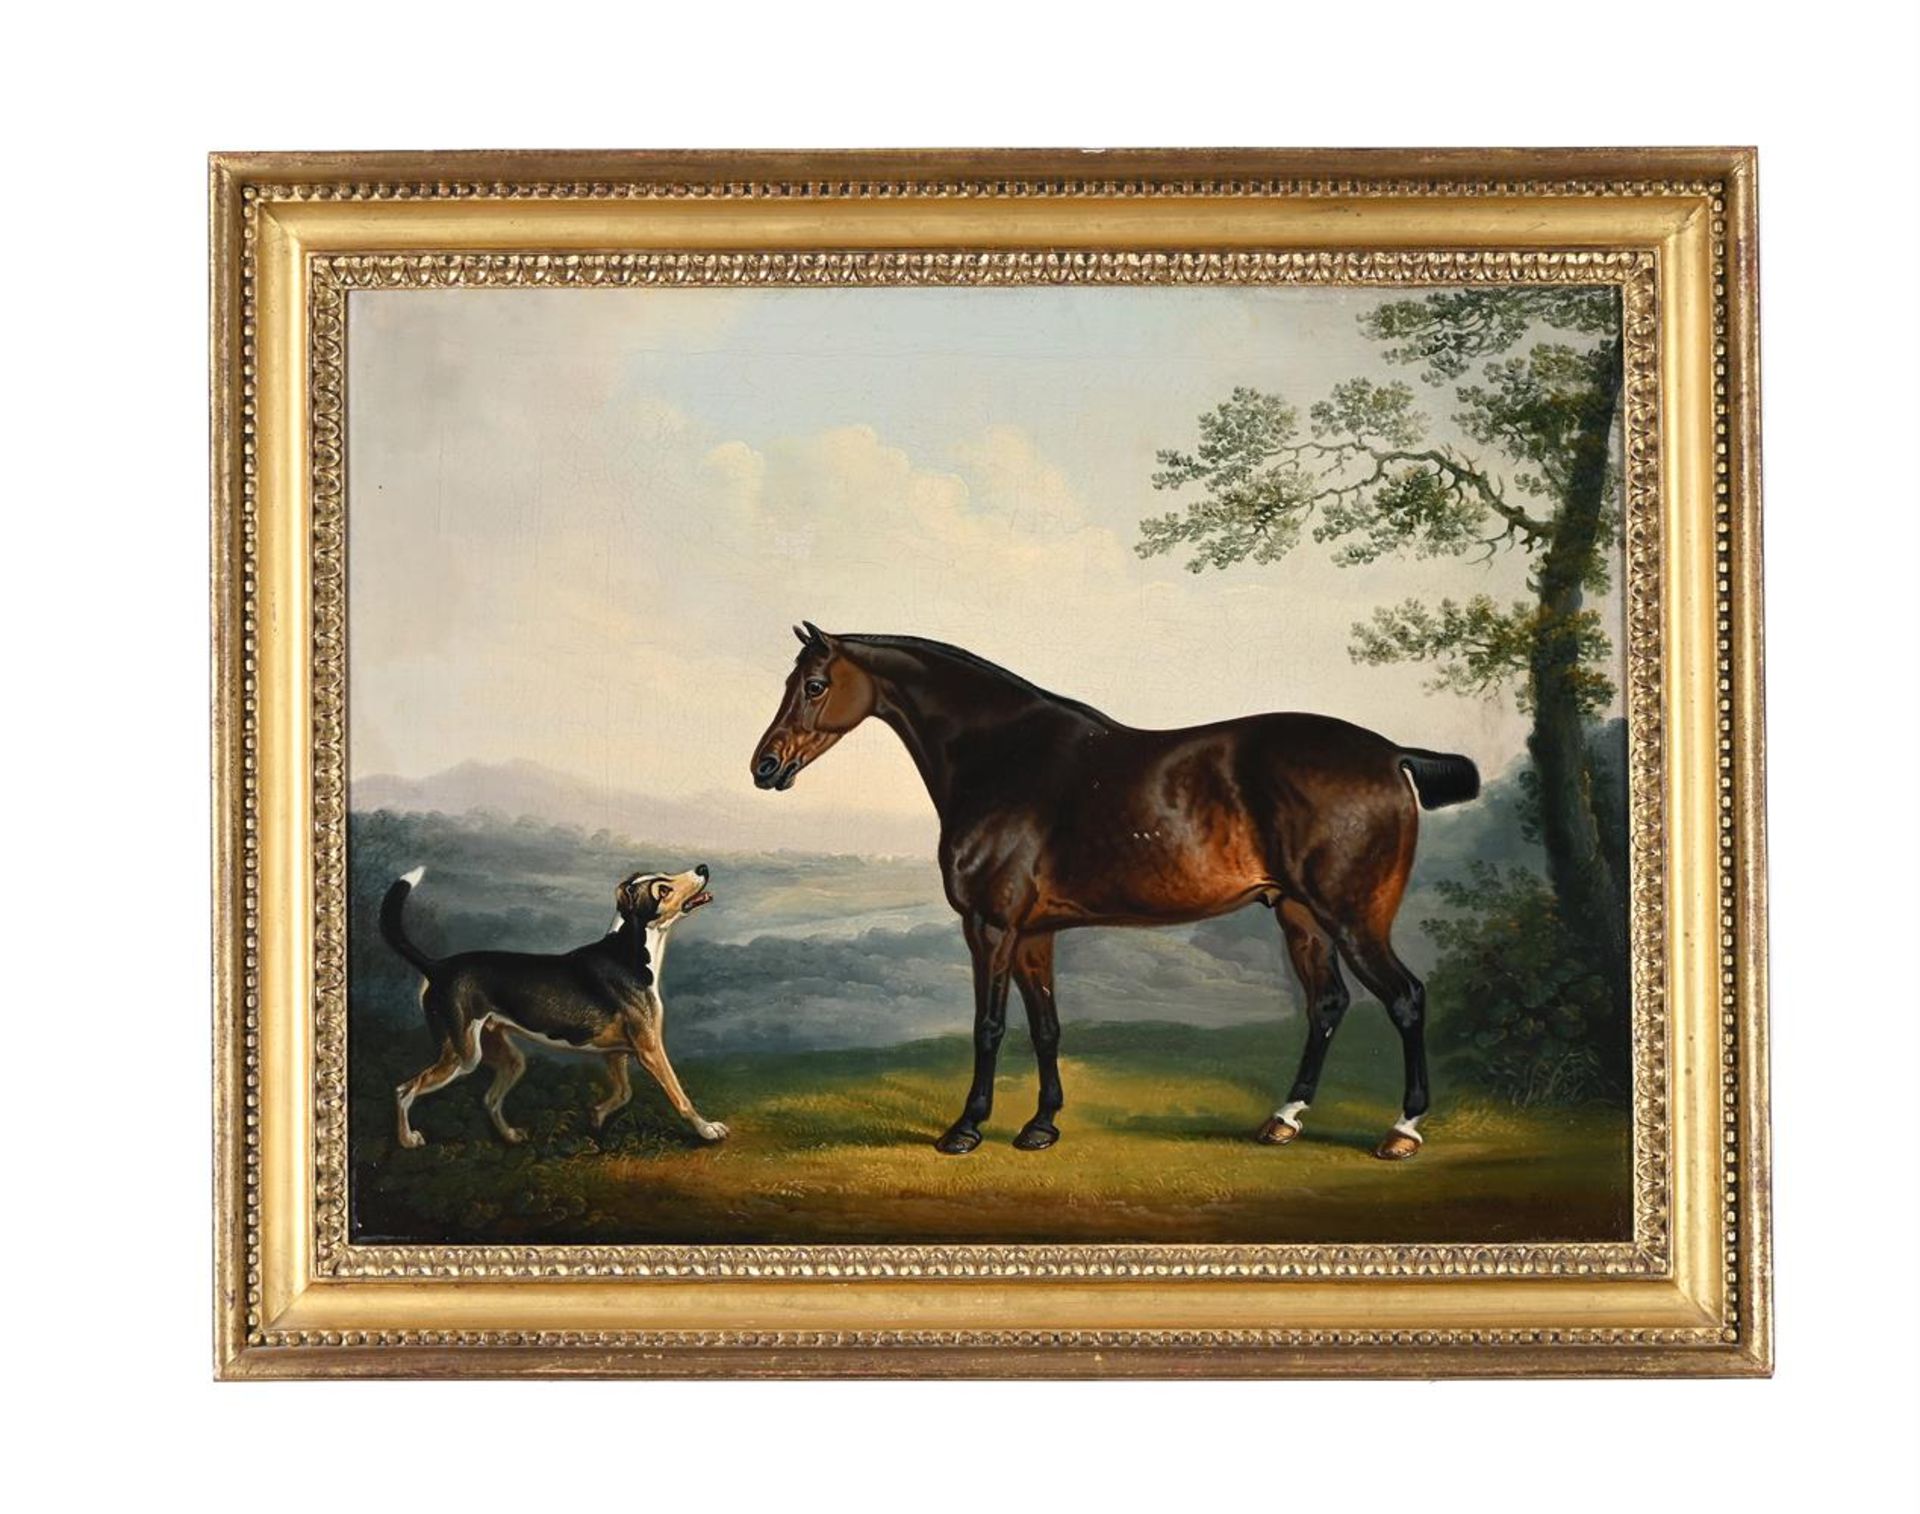 DANIEL CLOWES (BRITISH 1774-1829), A HORSE WITH A HOUND IN A WOODED LANDSCAPE - Image 2 of 3